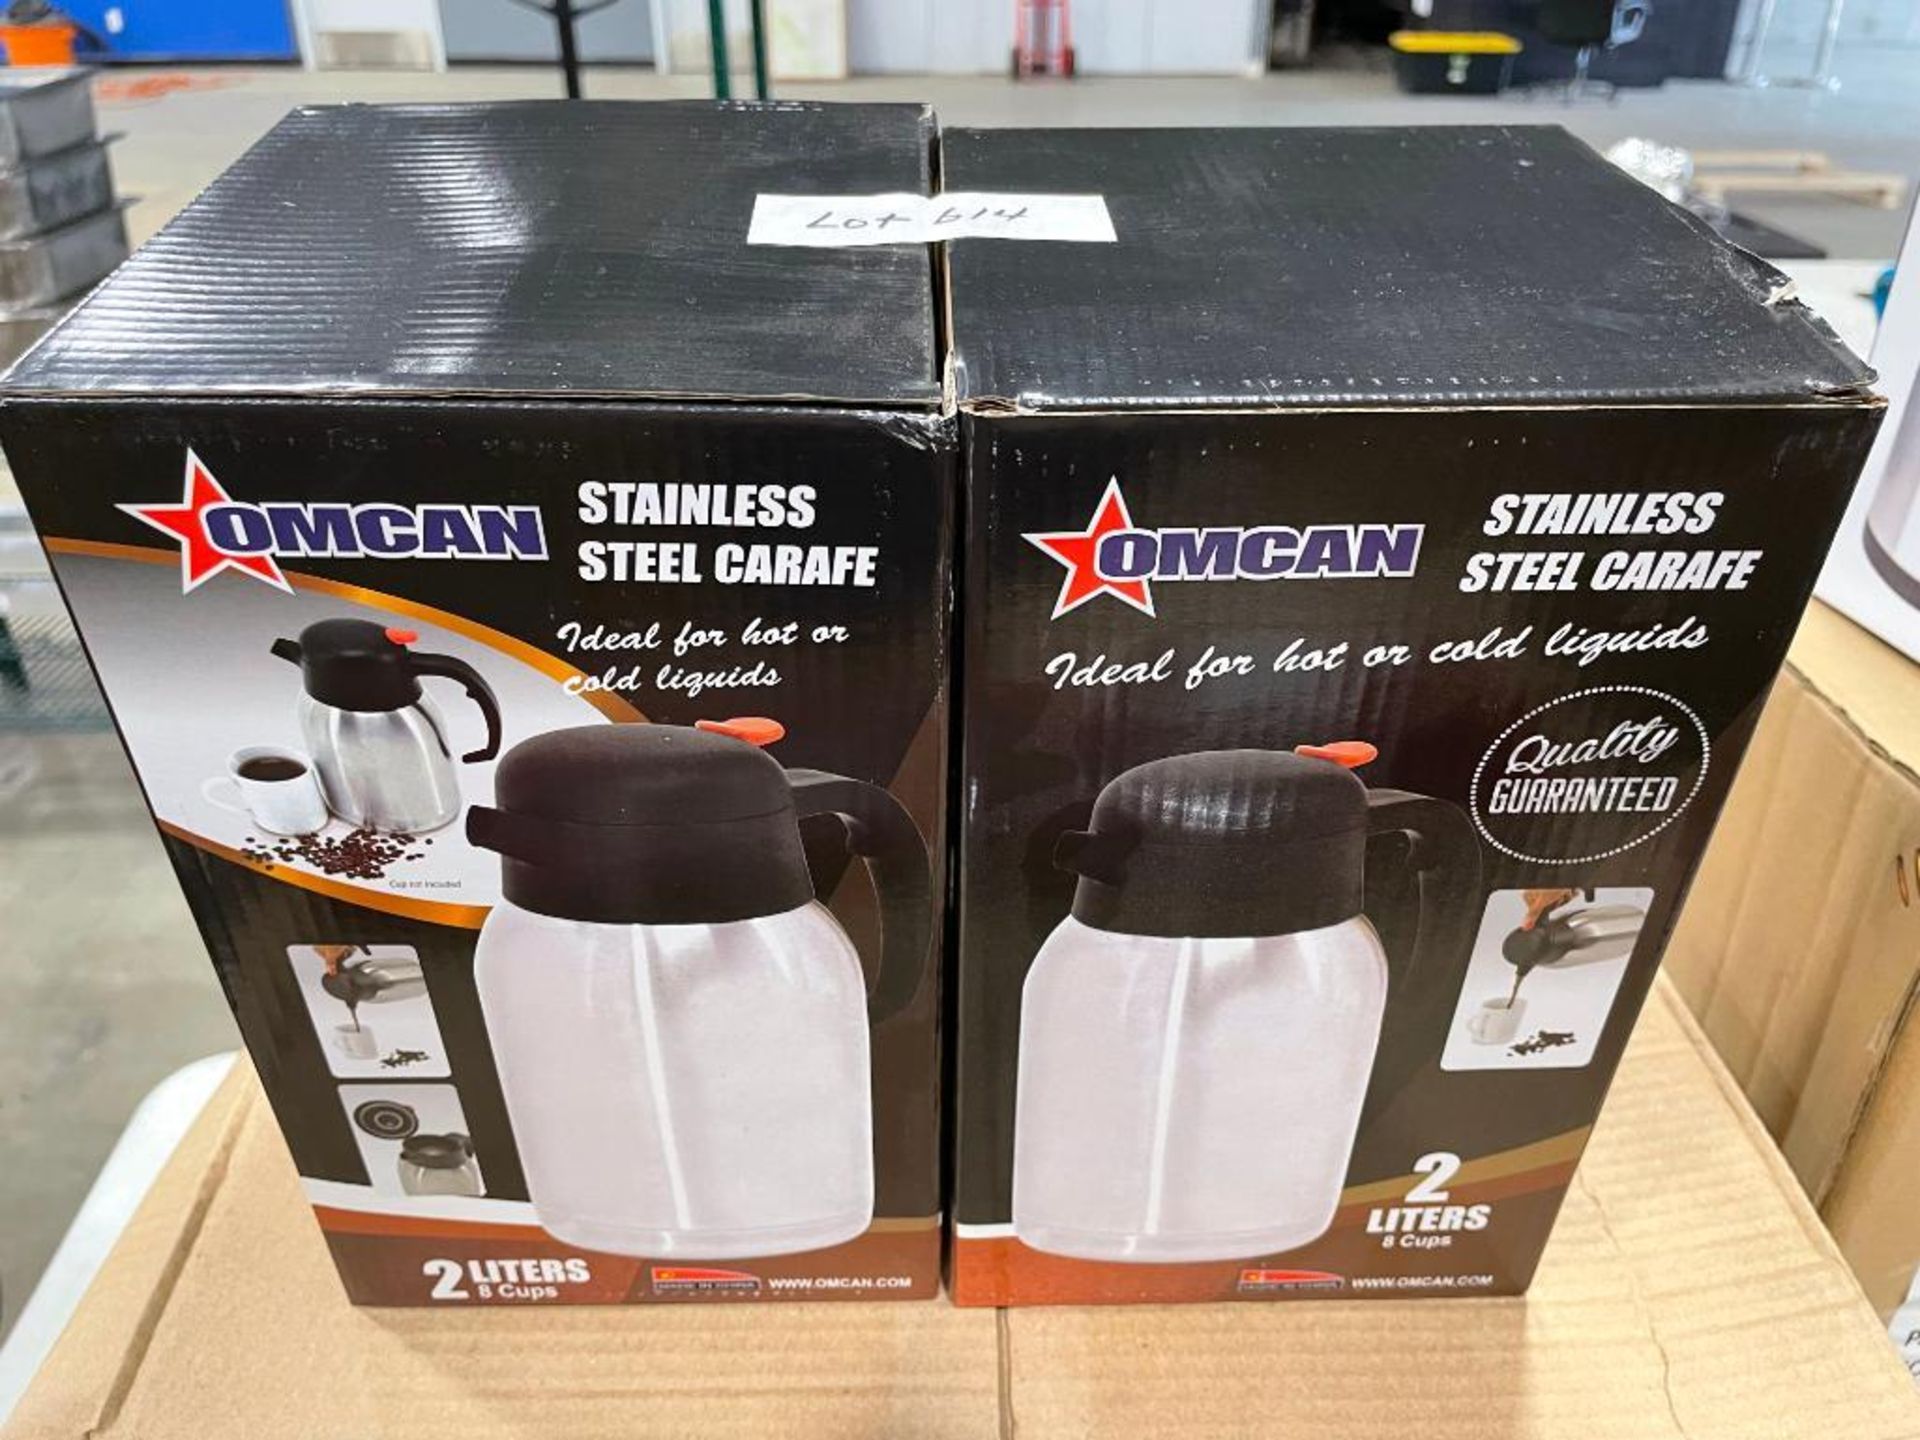 OMCAN THERMAL COFFEE CARAFE 8 CUP FOR COFFEE MACHINES AND MORE - NEW - LOT OF 2 - Image 3 of 8